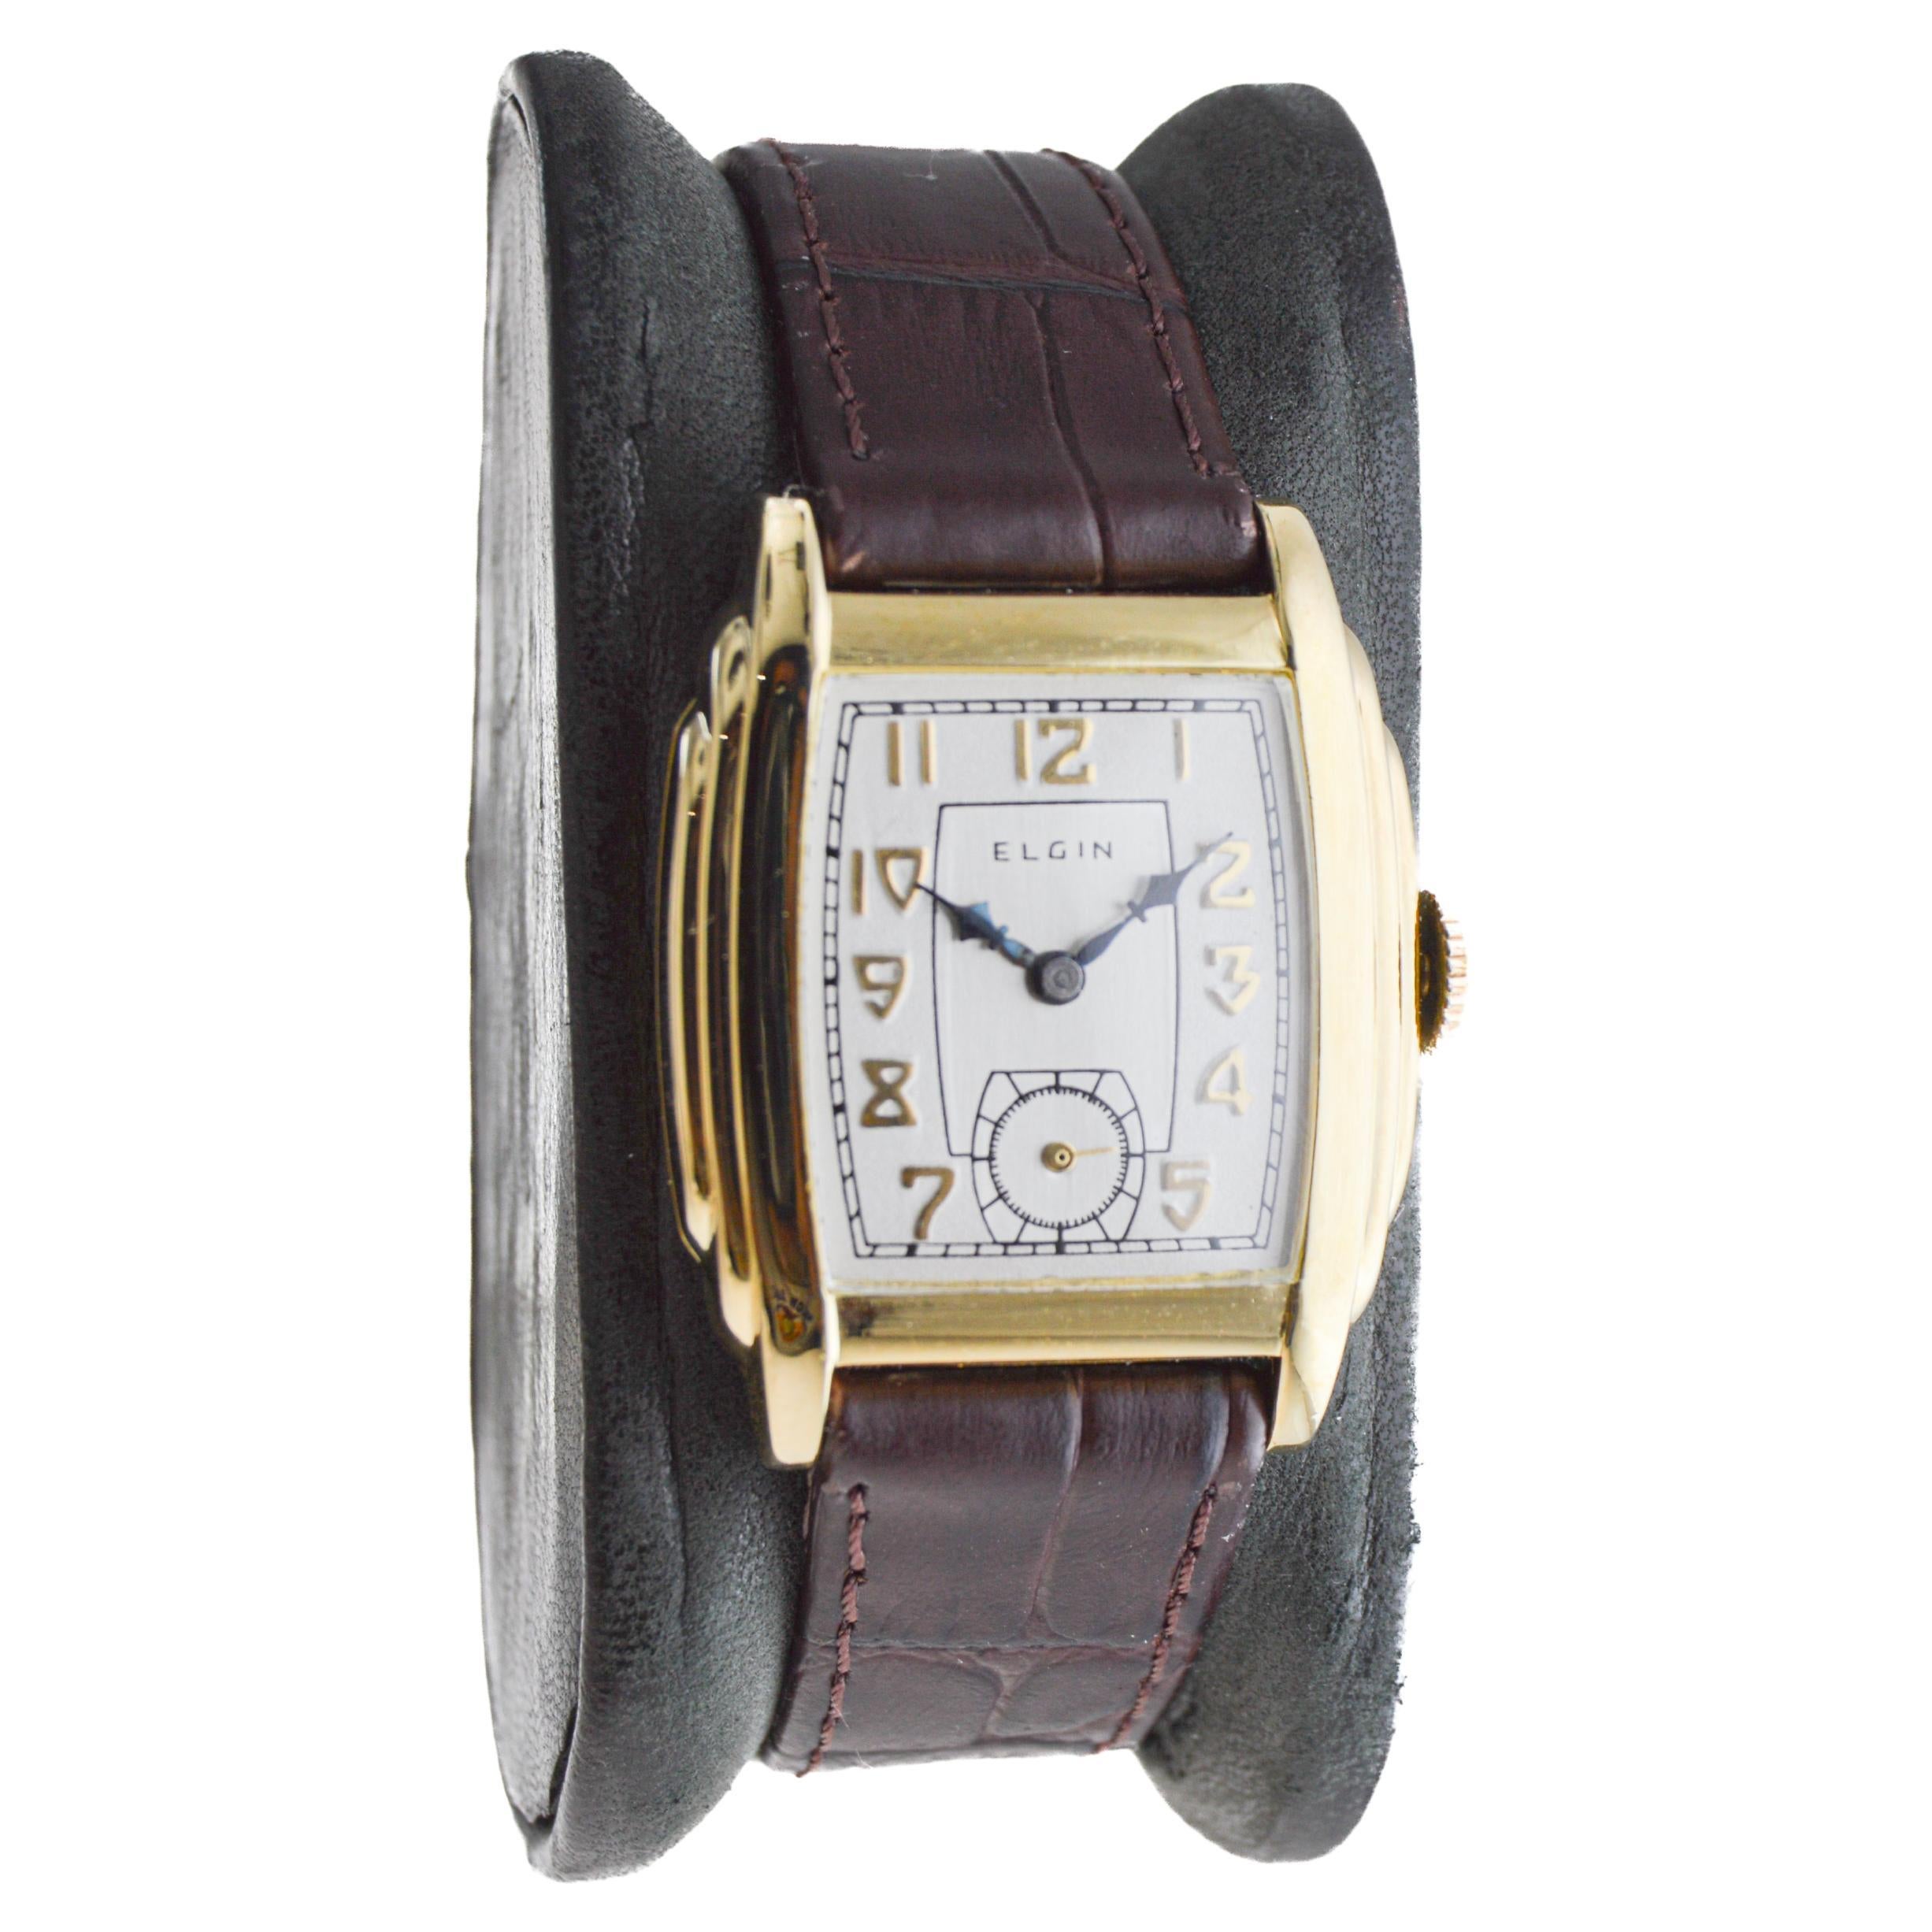 FACTORY / HOUSE: Elgin Watch Company
STYLE / REFERENCE: Art Deco / Tonneau Shape
METAL / MATERIAL: Yellow Gold Filled
CIRCA / YEAR: 1931
DIMENSIONS / SIZE: Length 27mm X Width 35mm
MOVEMENT / CALIBER: Manual Winding / 19 Jewels / Caliber 6/0